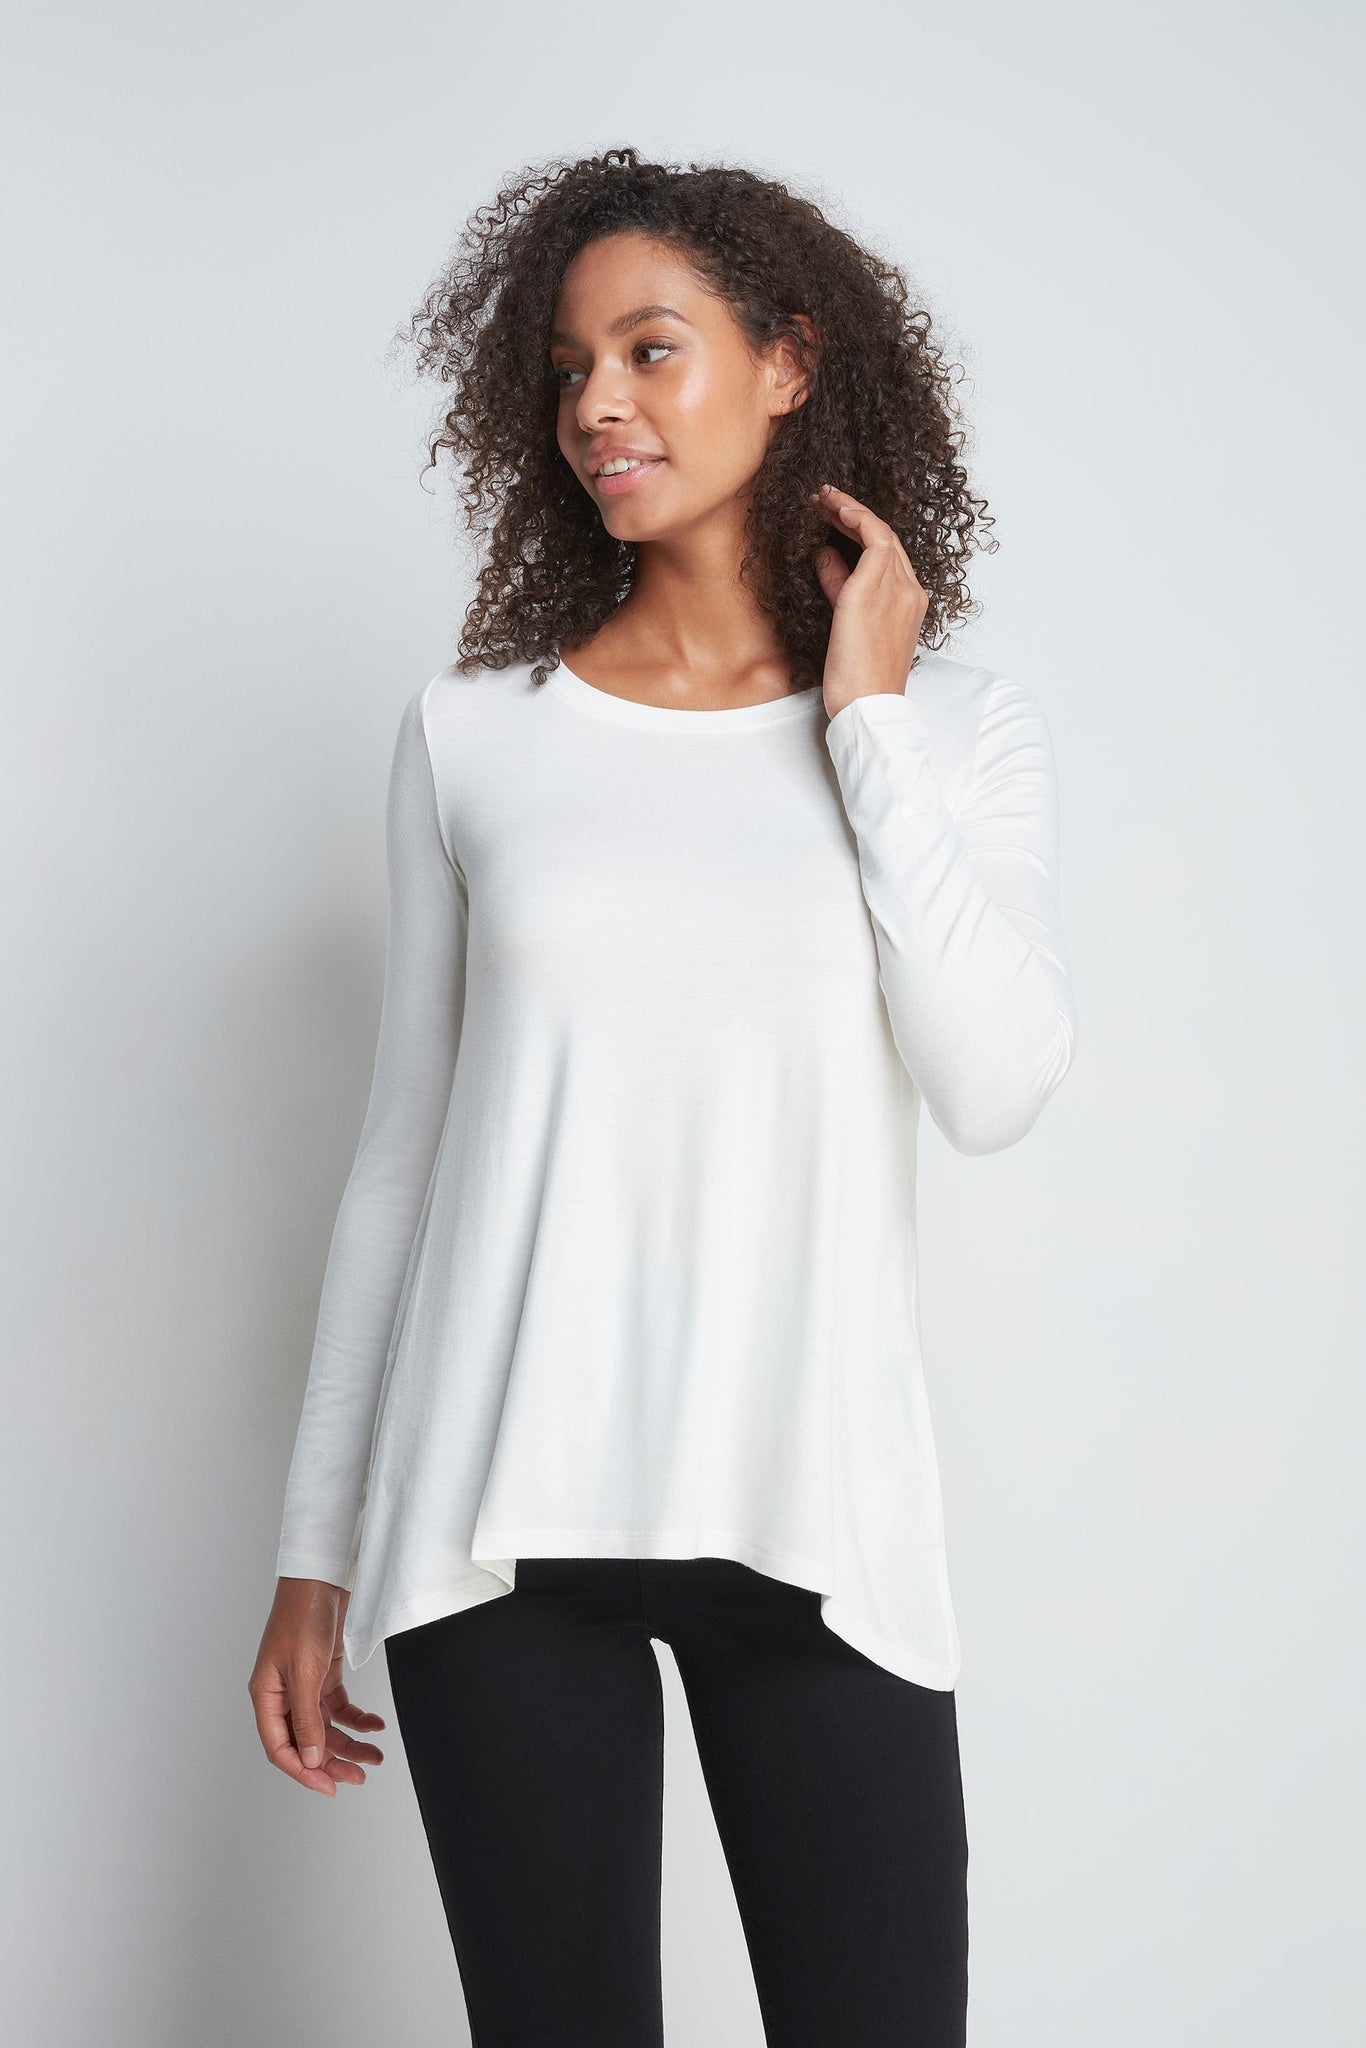 Lavender Hill Clothing Micro Modal Soft Flattering Long Sleeve Cream  A-Line Top